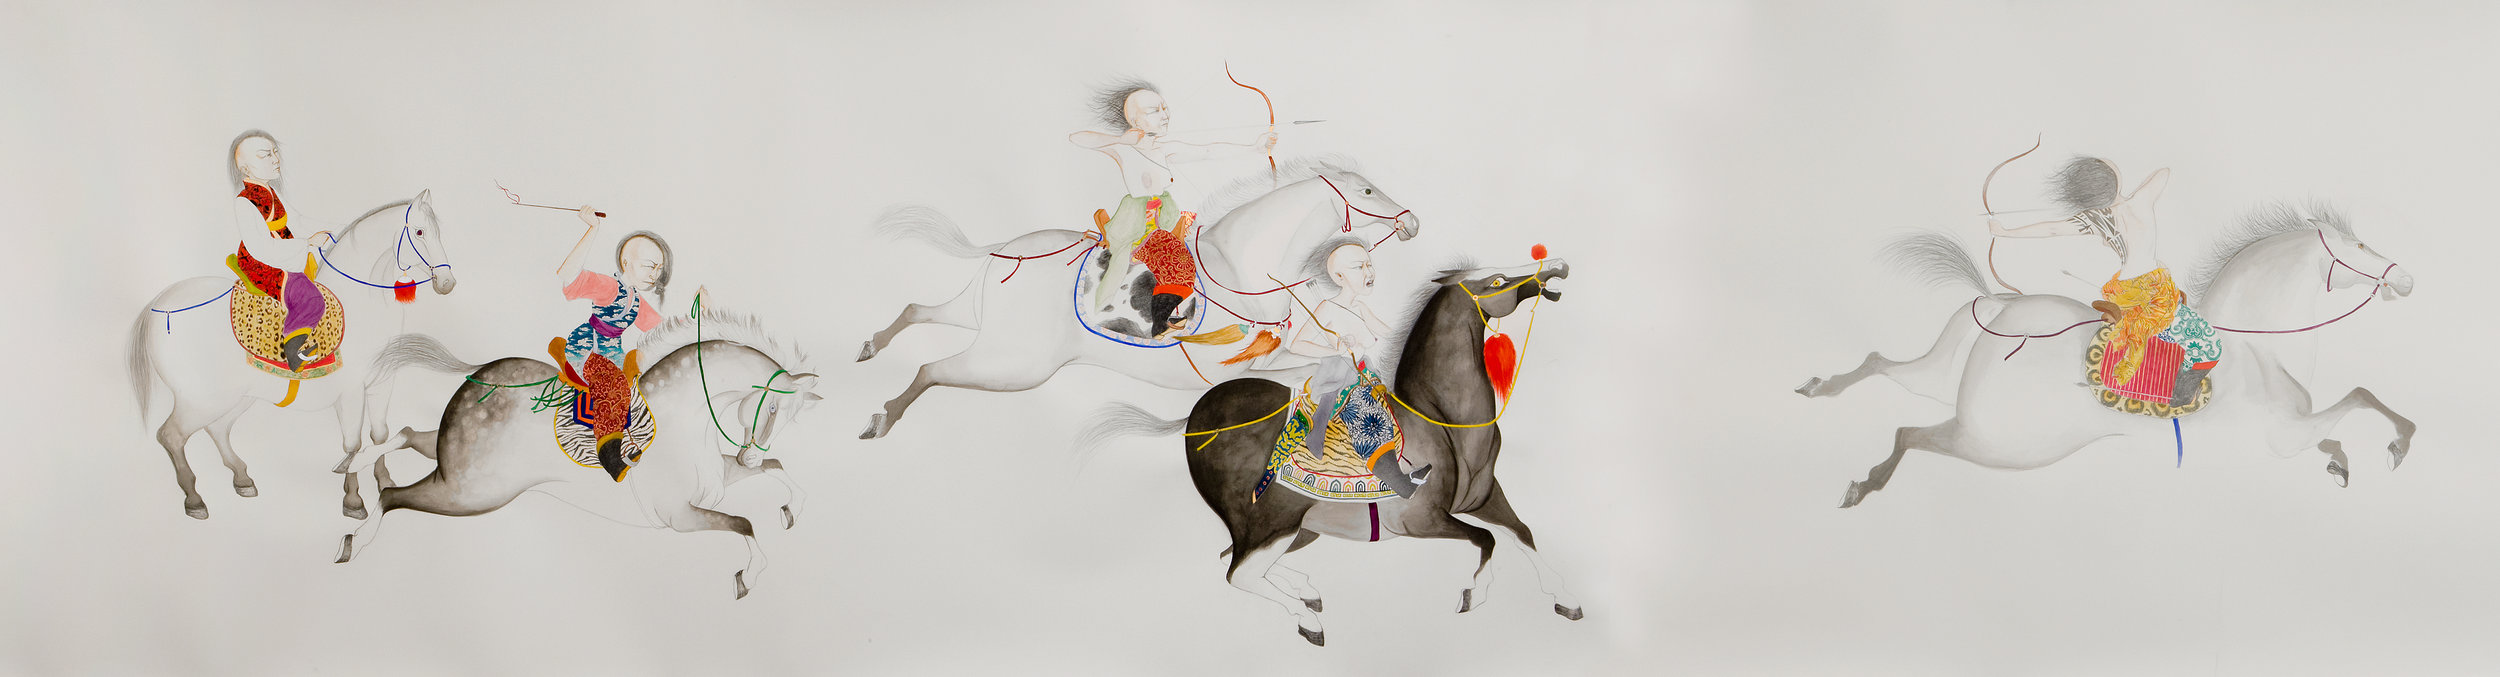   Women Warriors , 2008 Graphite, watercolor, gouache, ink on paper 50.5 X 192 inches Created during artist residency at Santa Fe Art Institute, Santa Fe, NM Private collection 